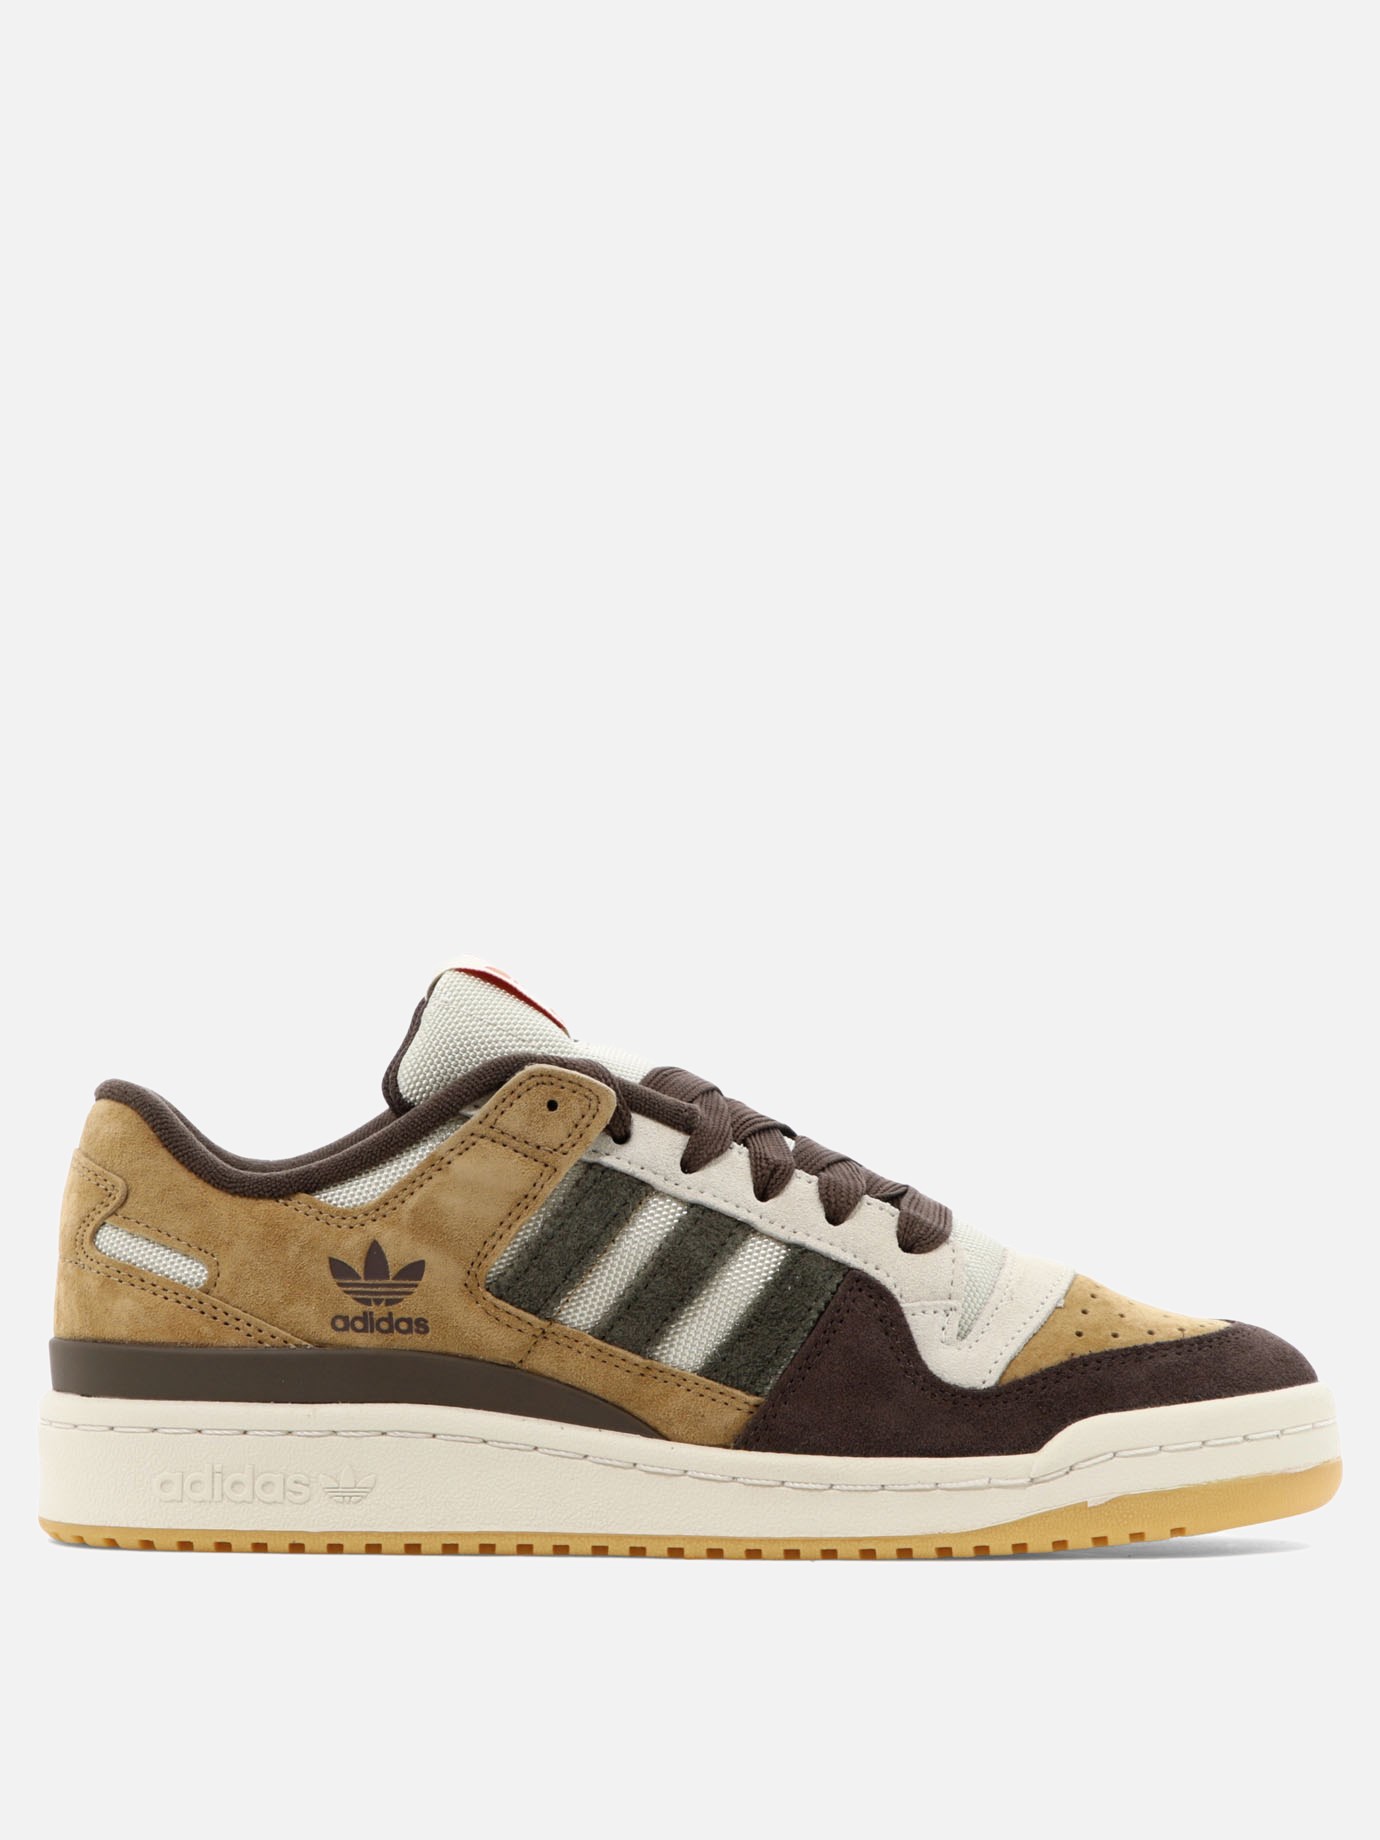  Forum 84 Low CL  sneakersby Adidas - 2